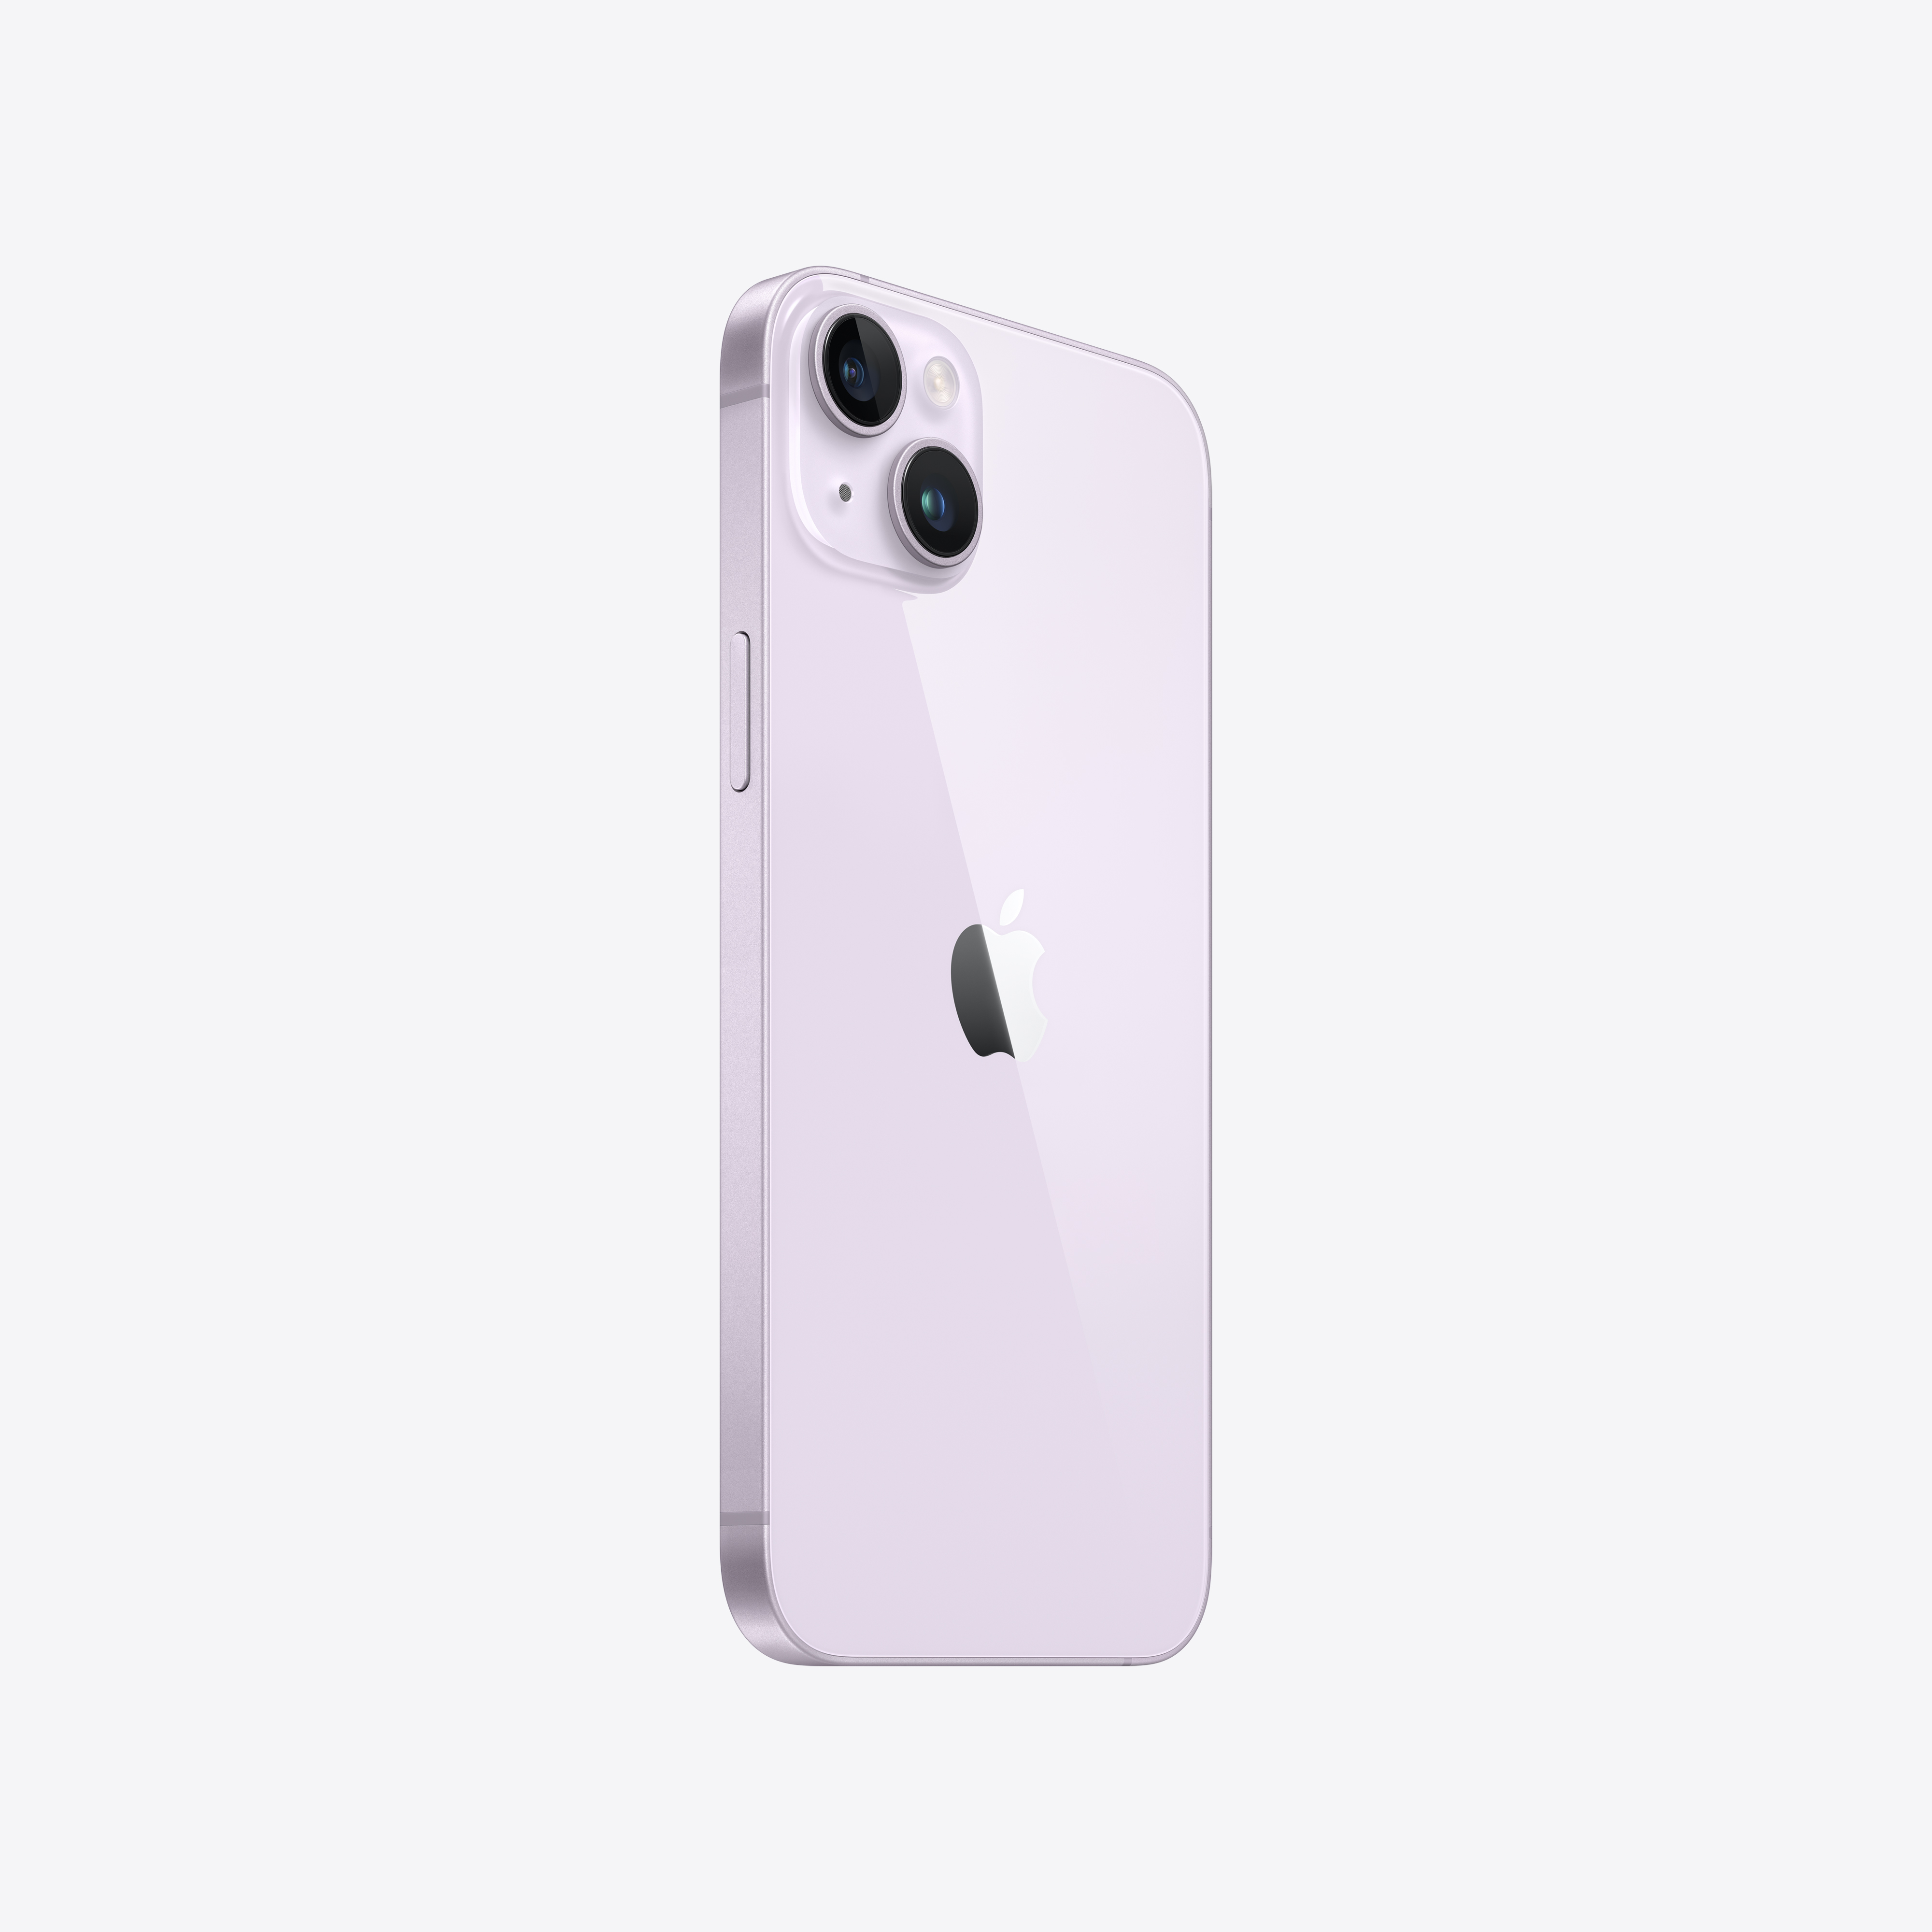 Apple iPhone 14 plus (MQ503HN/A) Purple with 128GB, iOS 16, A15 Bionic chip, 6core CPU with 2 performance, 6.7 inch OLED display